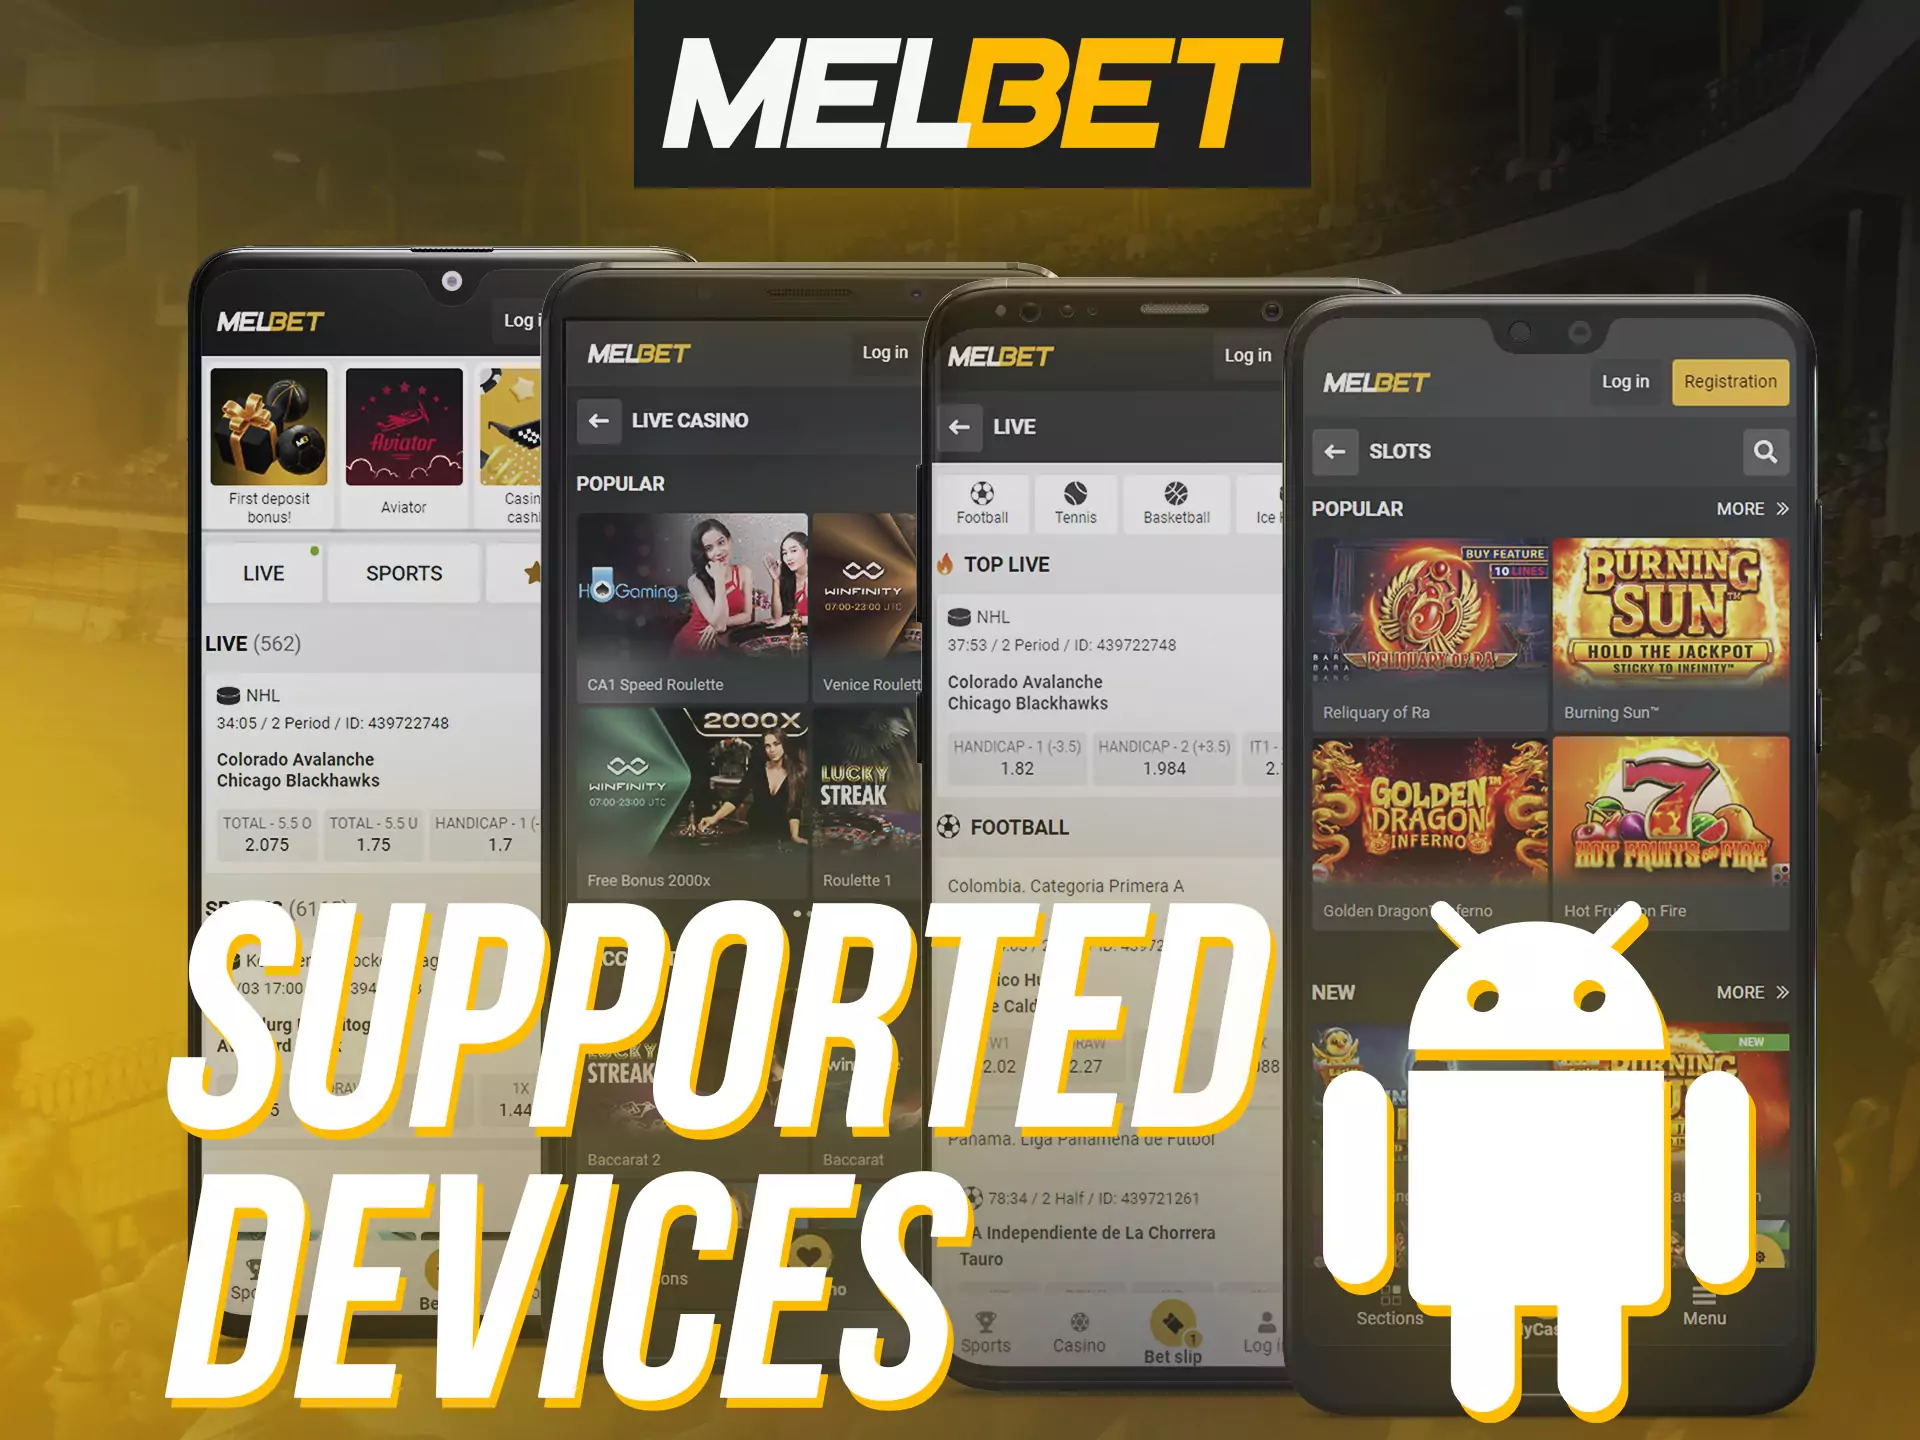 The Melbet app can be supported on many Android devices.